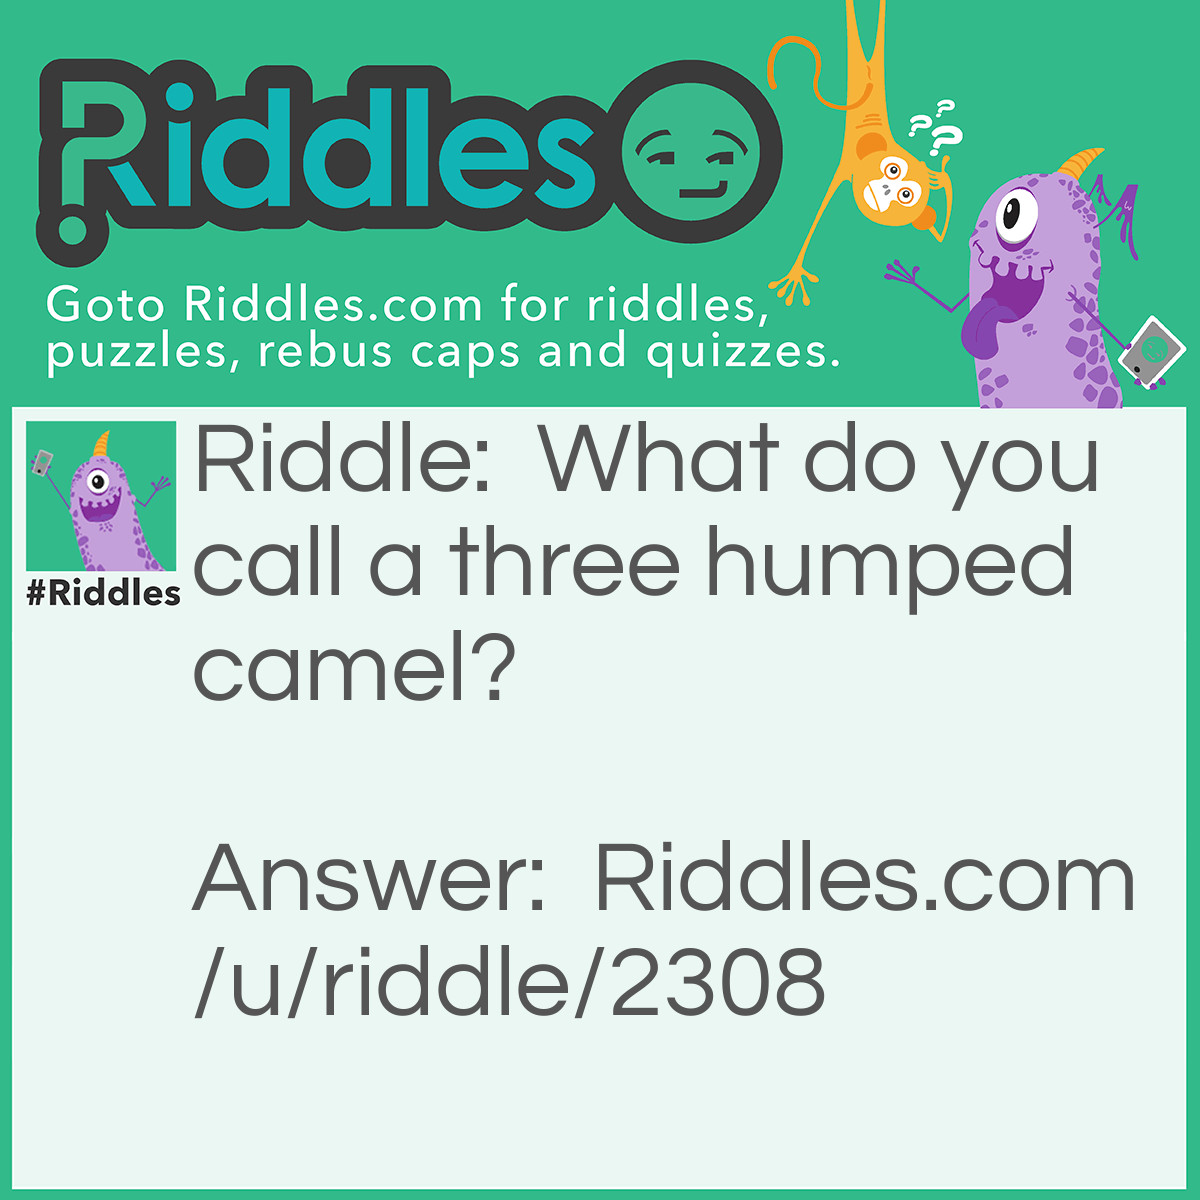 Riddle: What do you call a three humped camel? Answer: Pregnant.